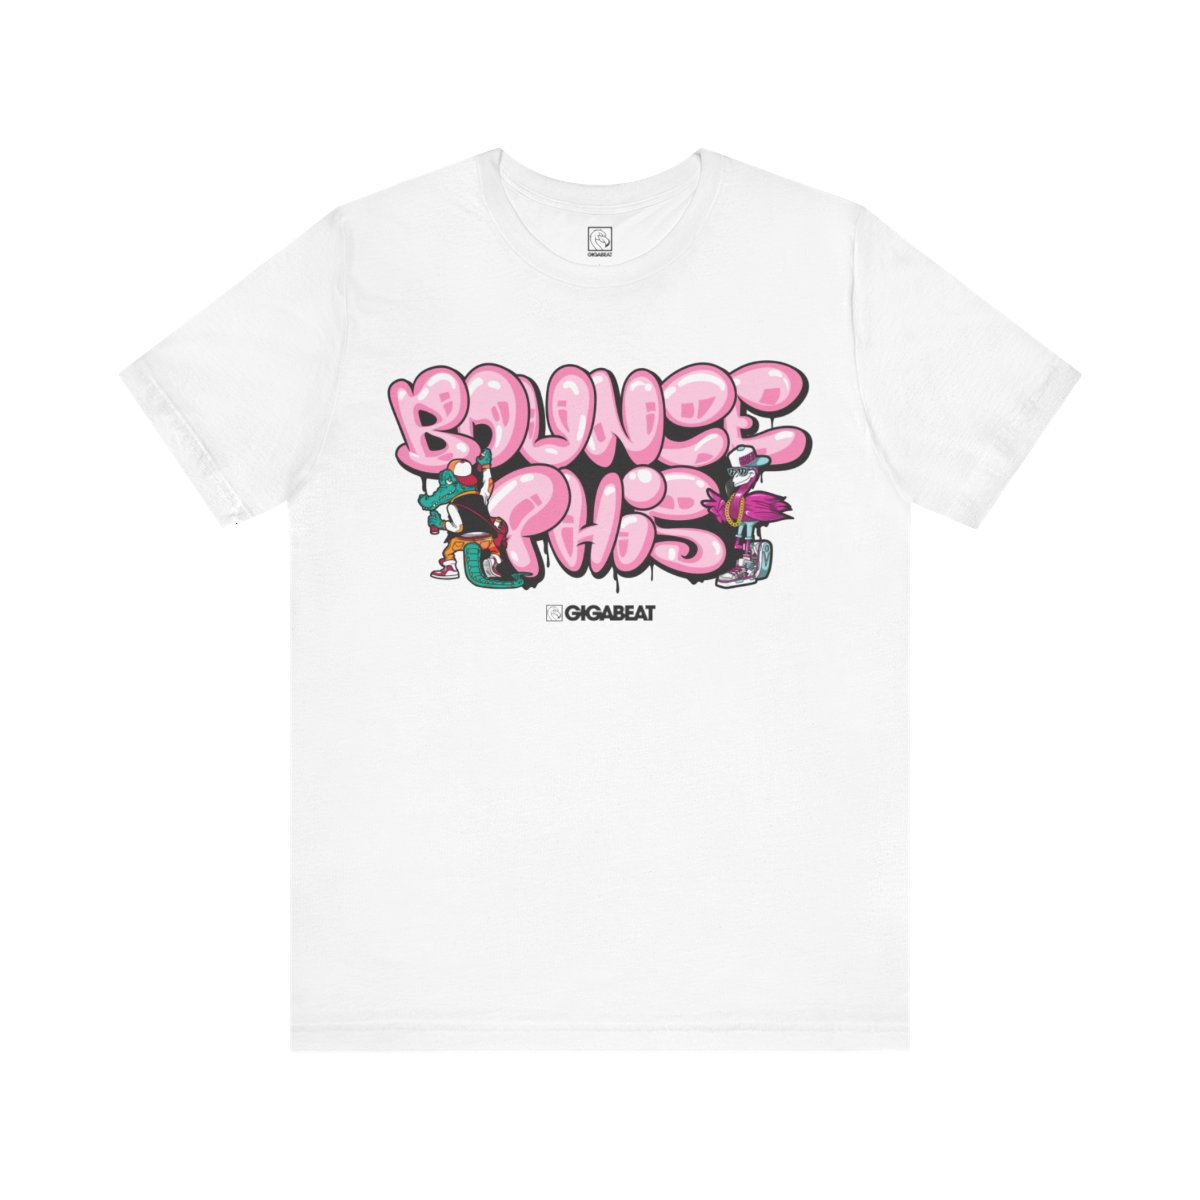 Bounce This | Gigabeat Records | Bella Canvas Unisex Jersey Short Sleeve Tee